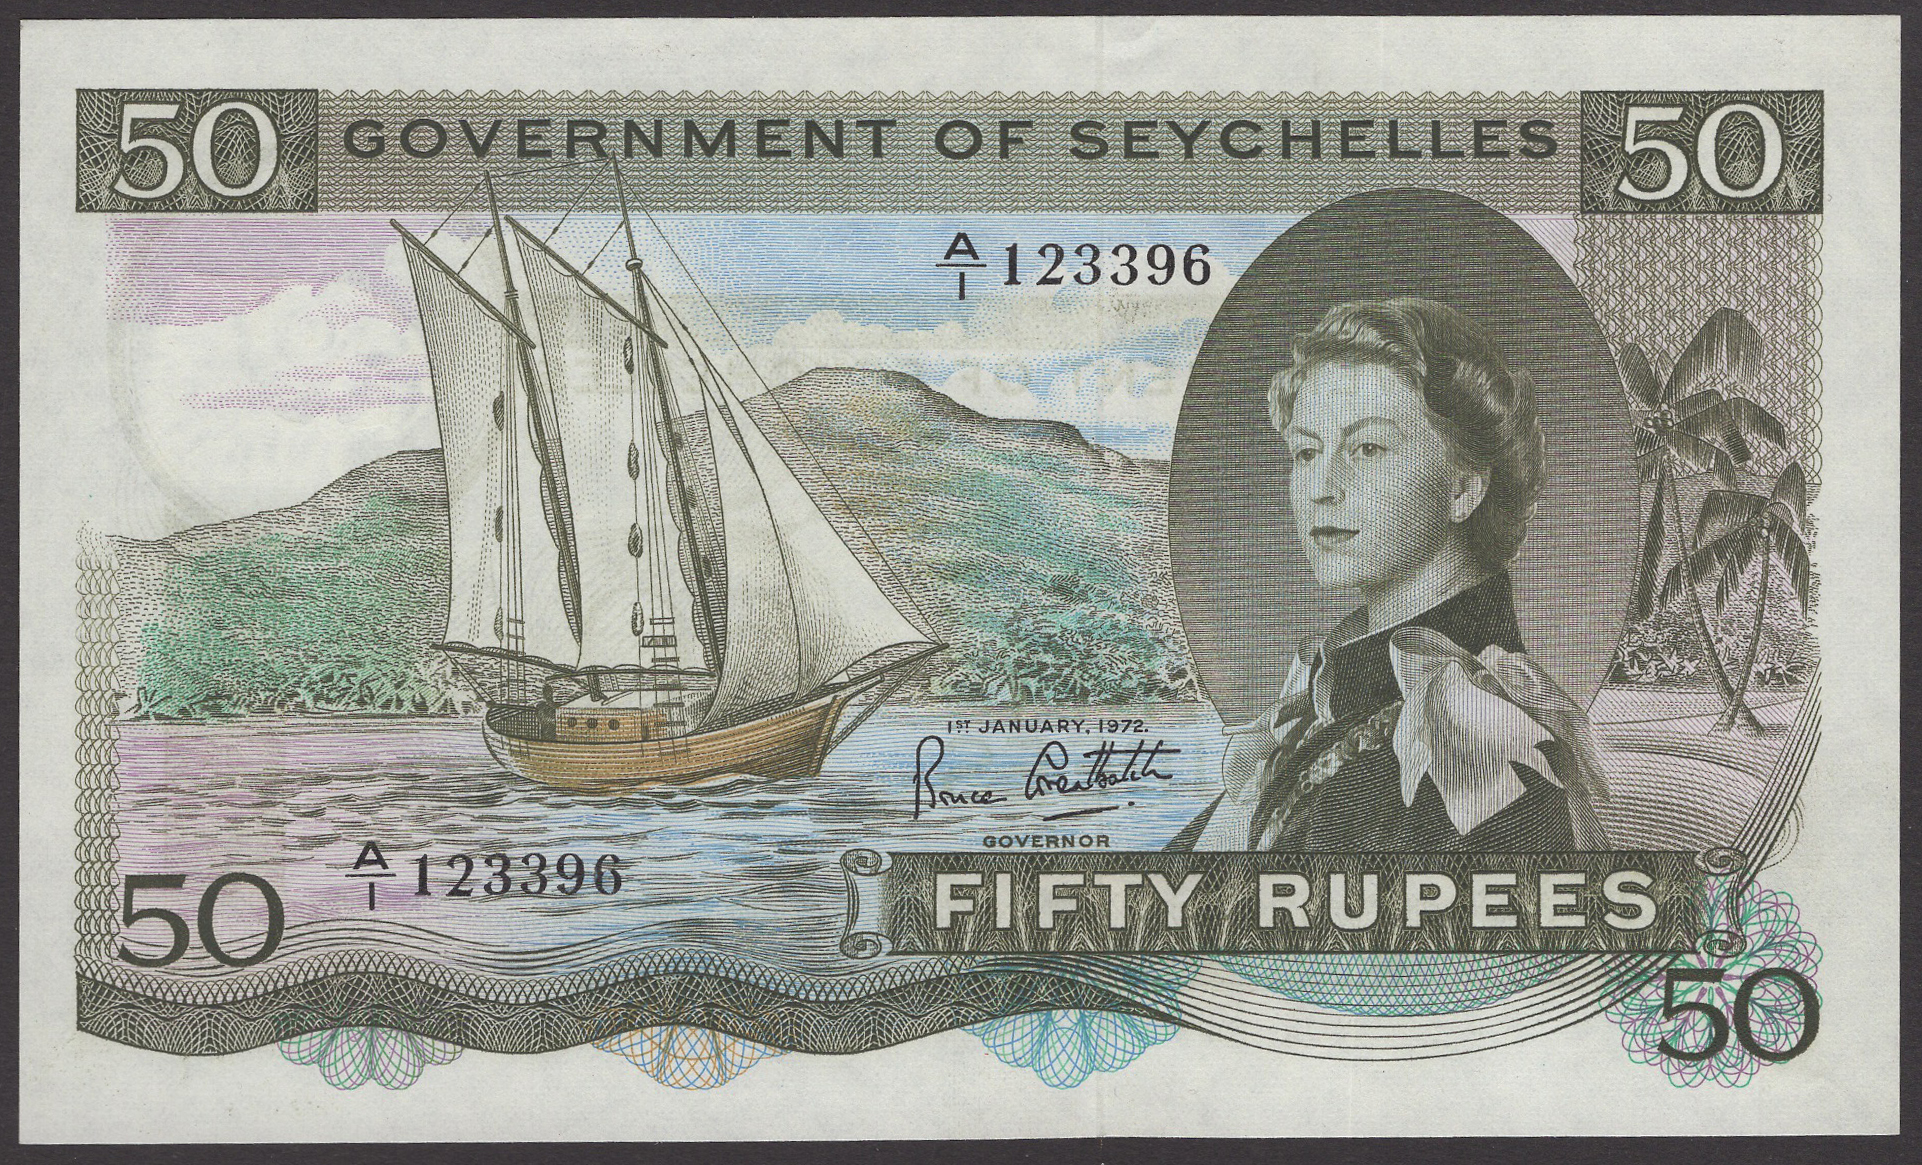 Government of Seychelles, 50 Rupees, 1 January 1972, serial number A/1 123396, Greatbach...